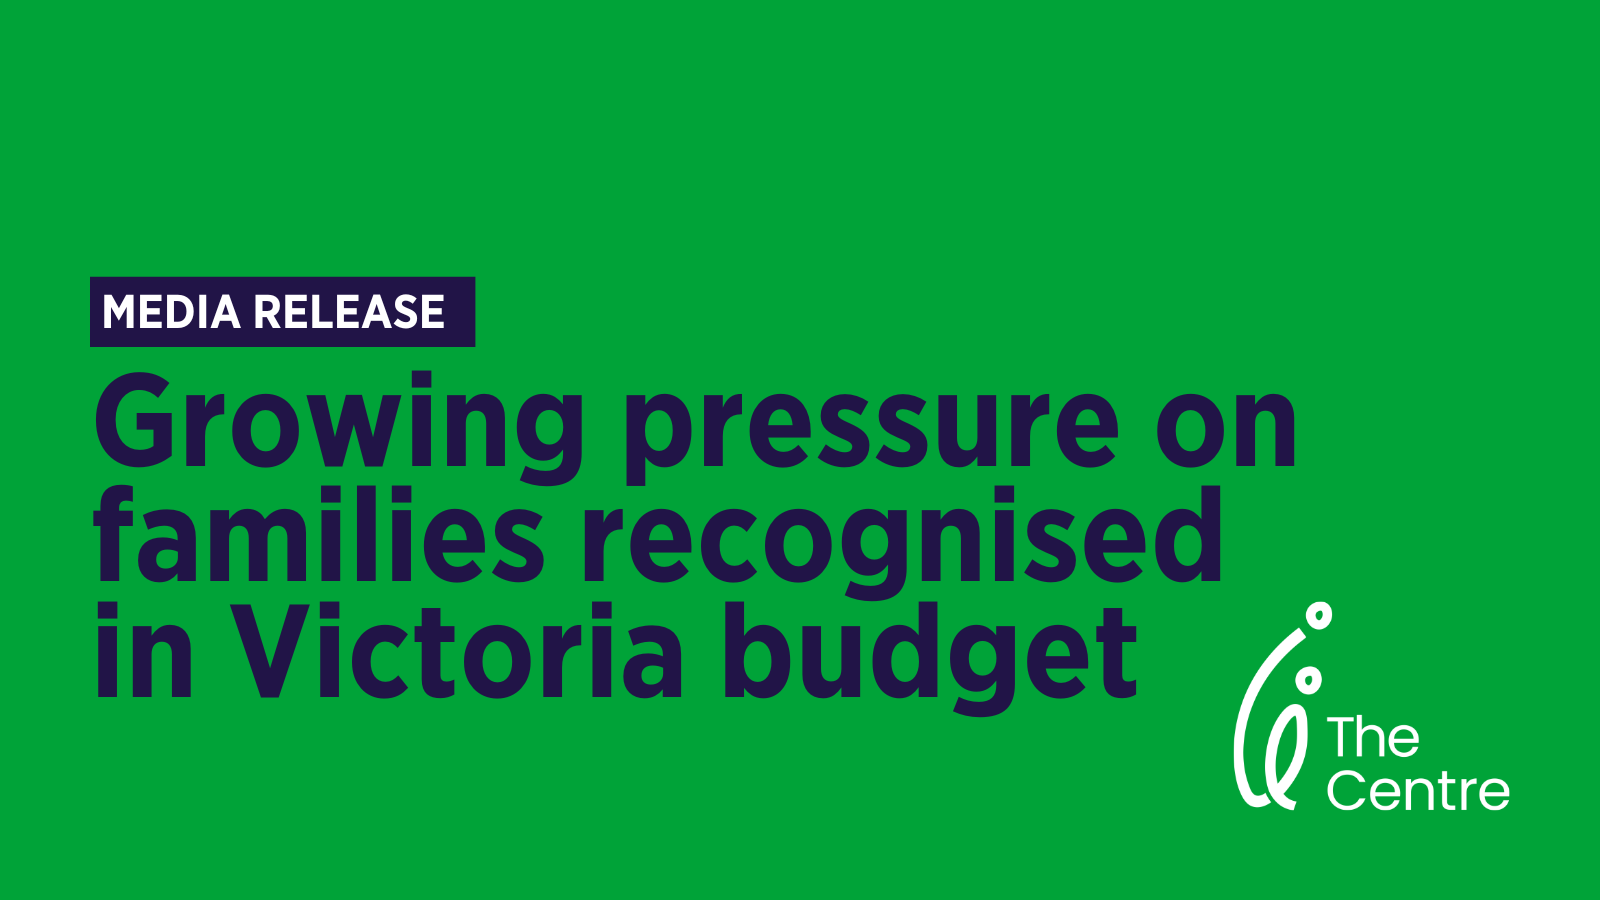 Media Release - Growing pressure on families recognised in Premier Allen’s first budget